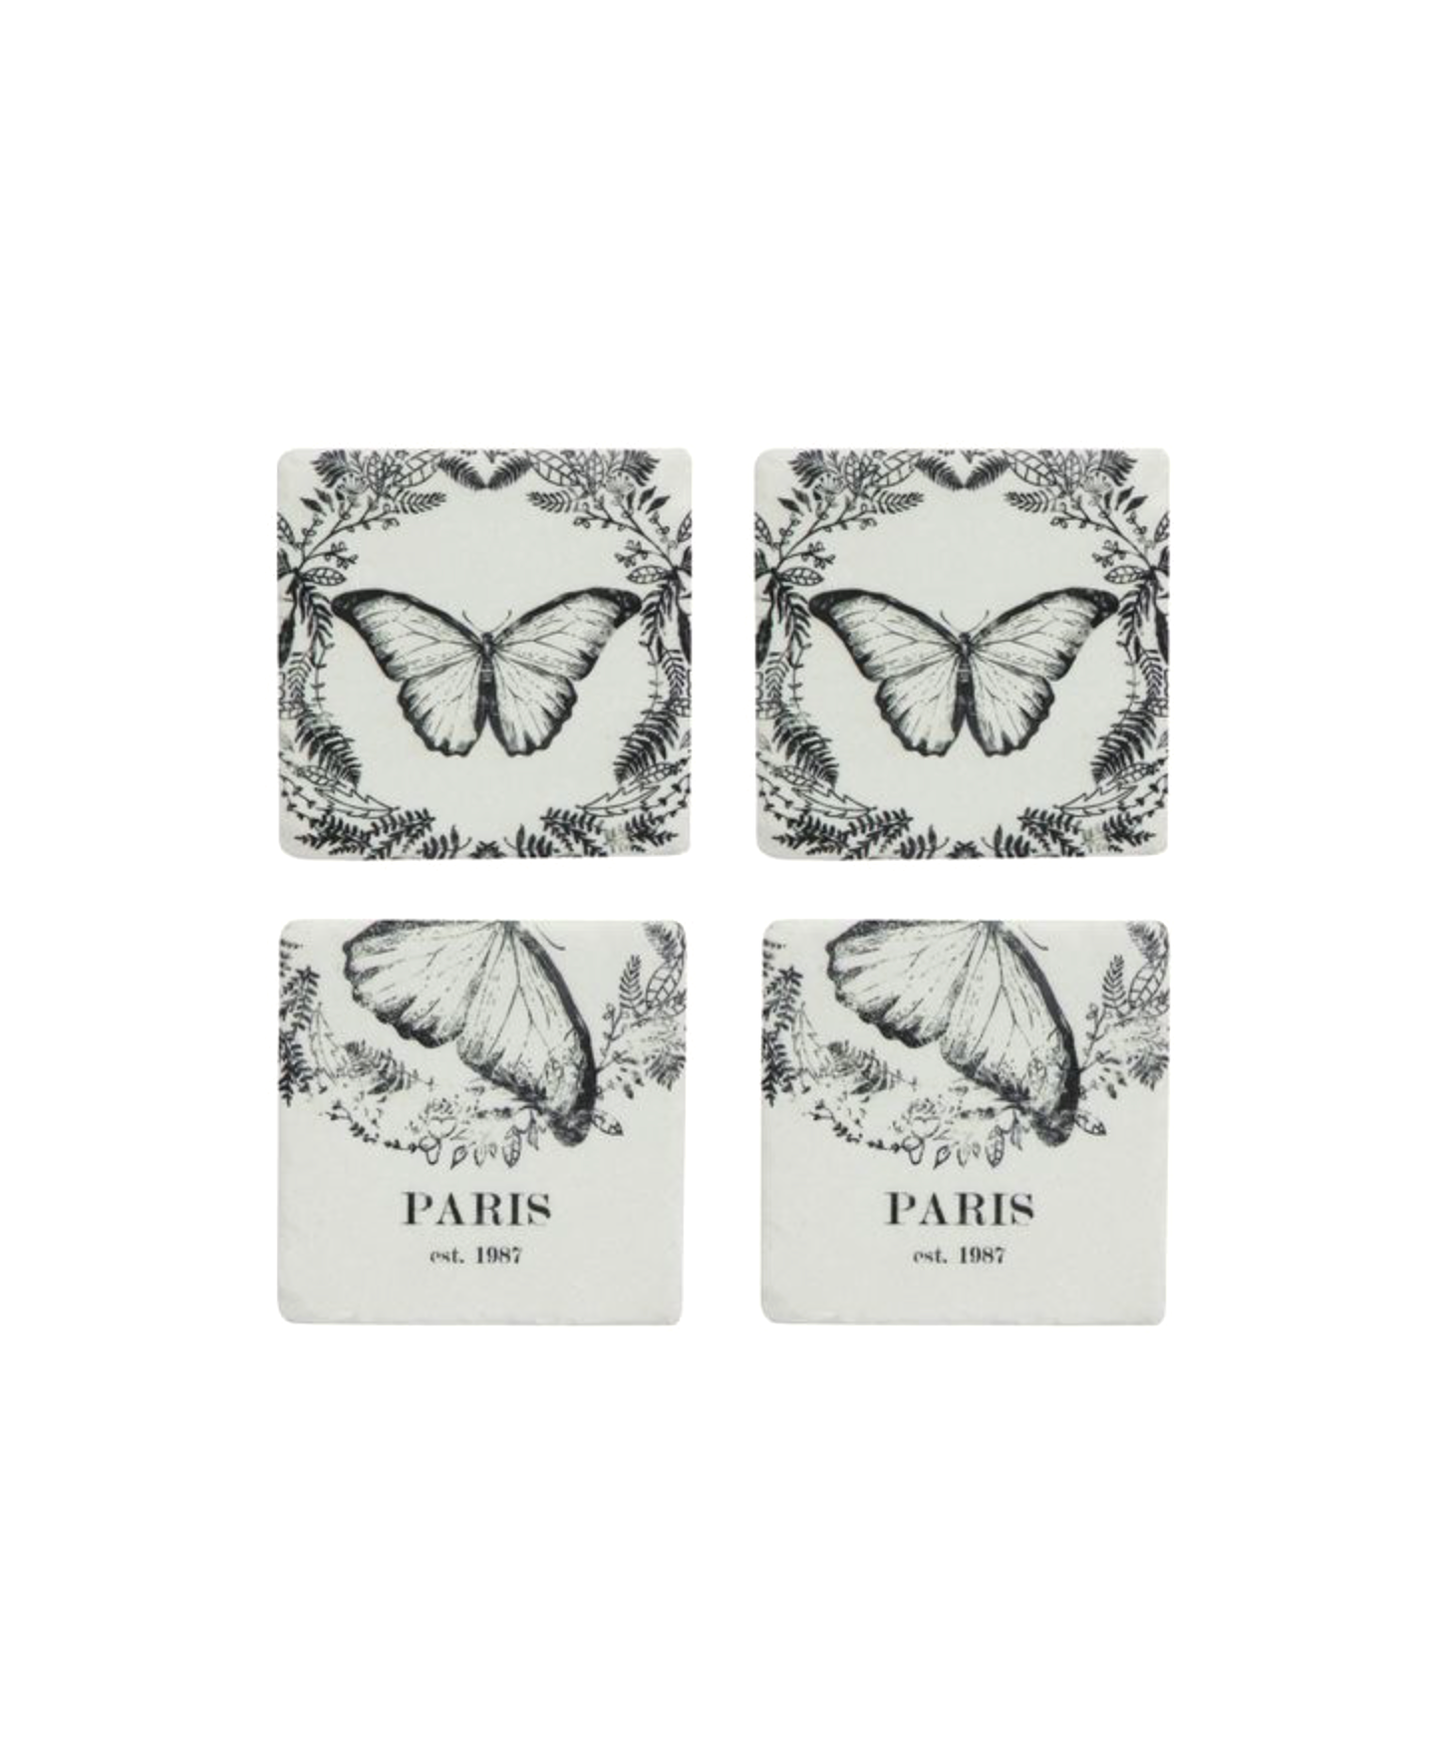 PARISIAN BUTTERFLY COASTERS - SET OF 4